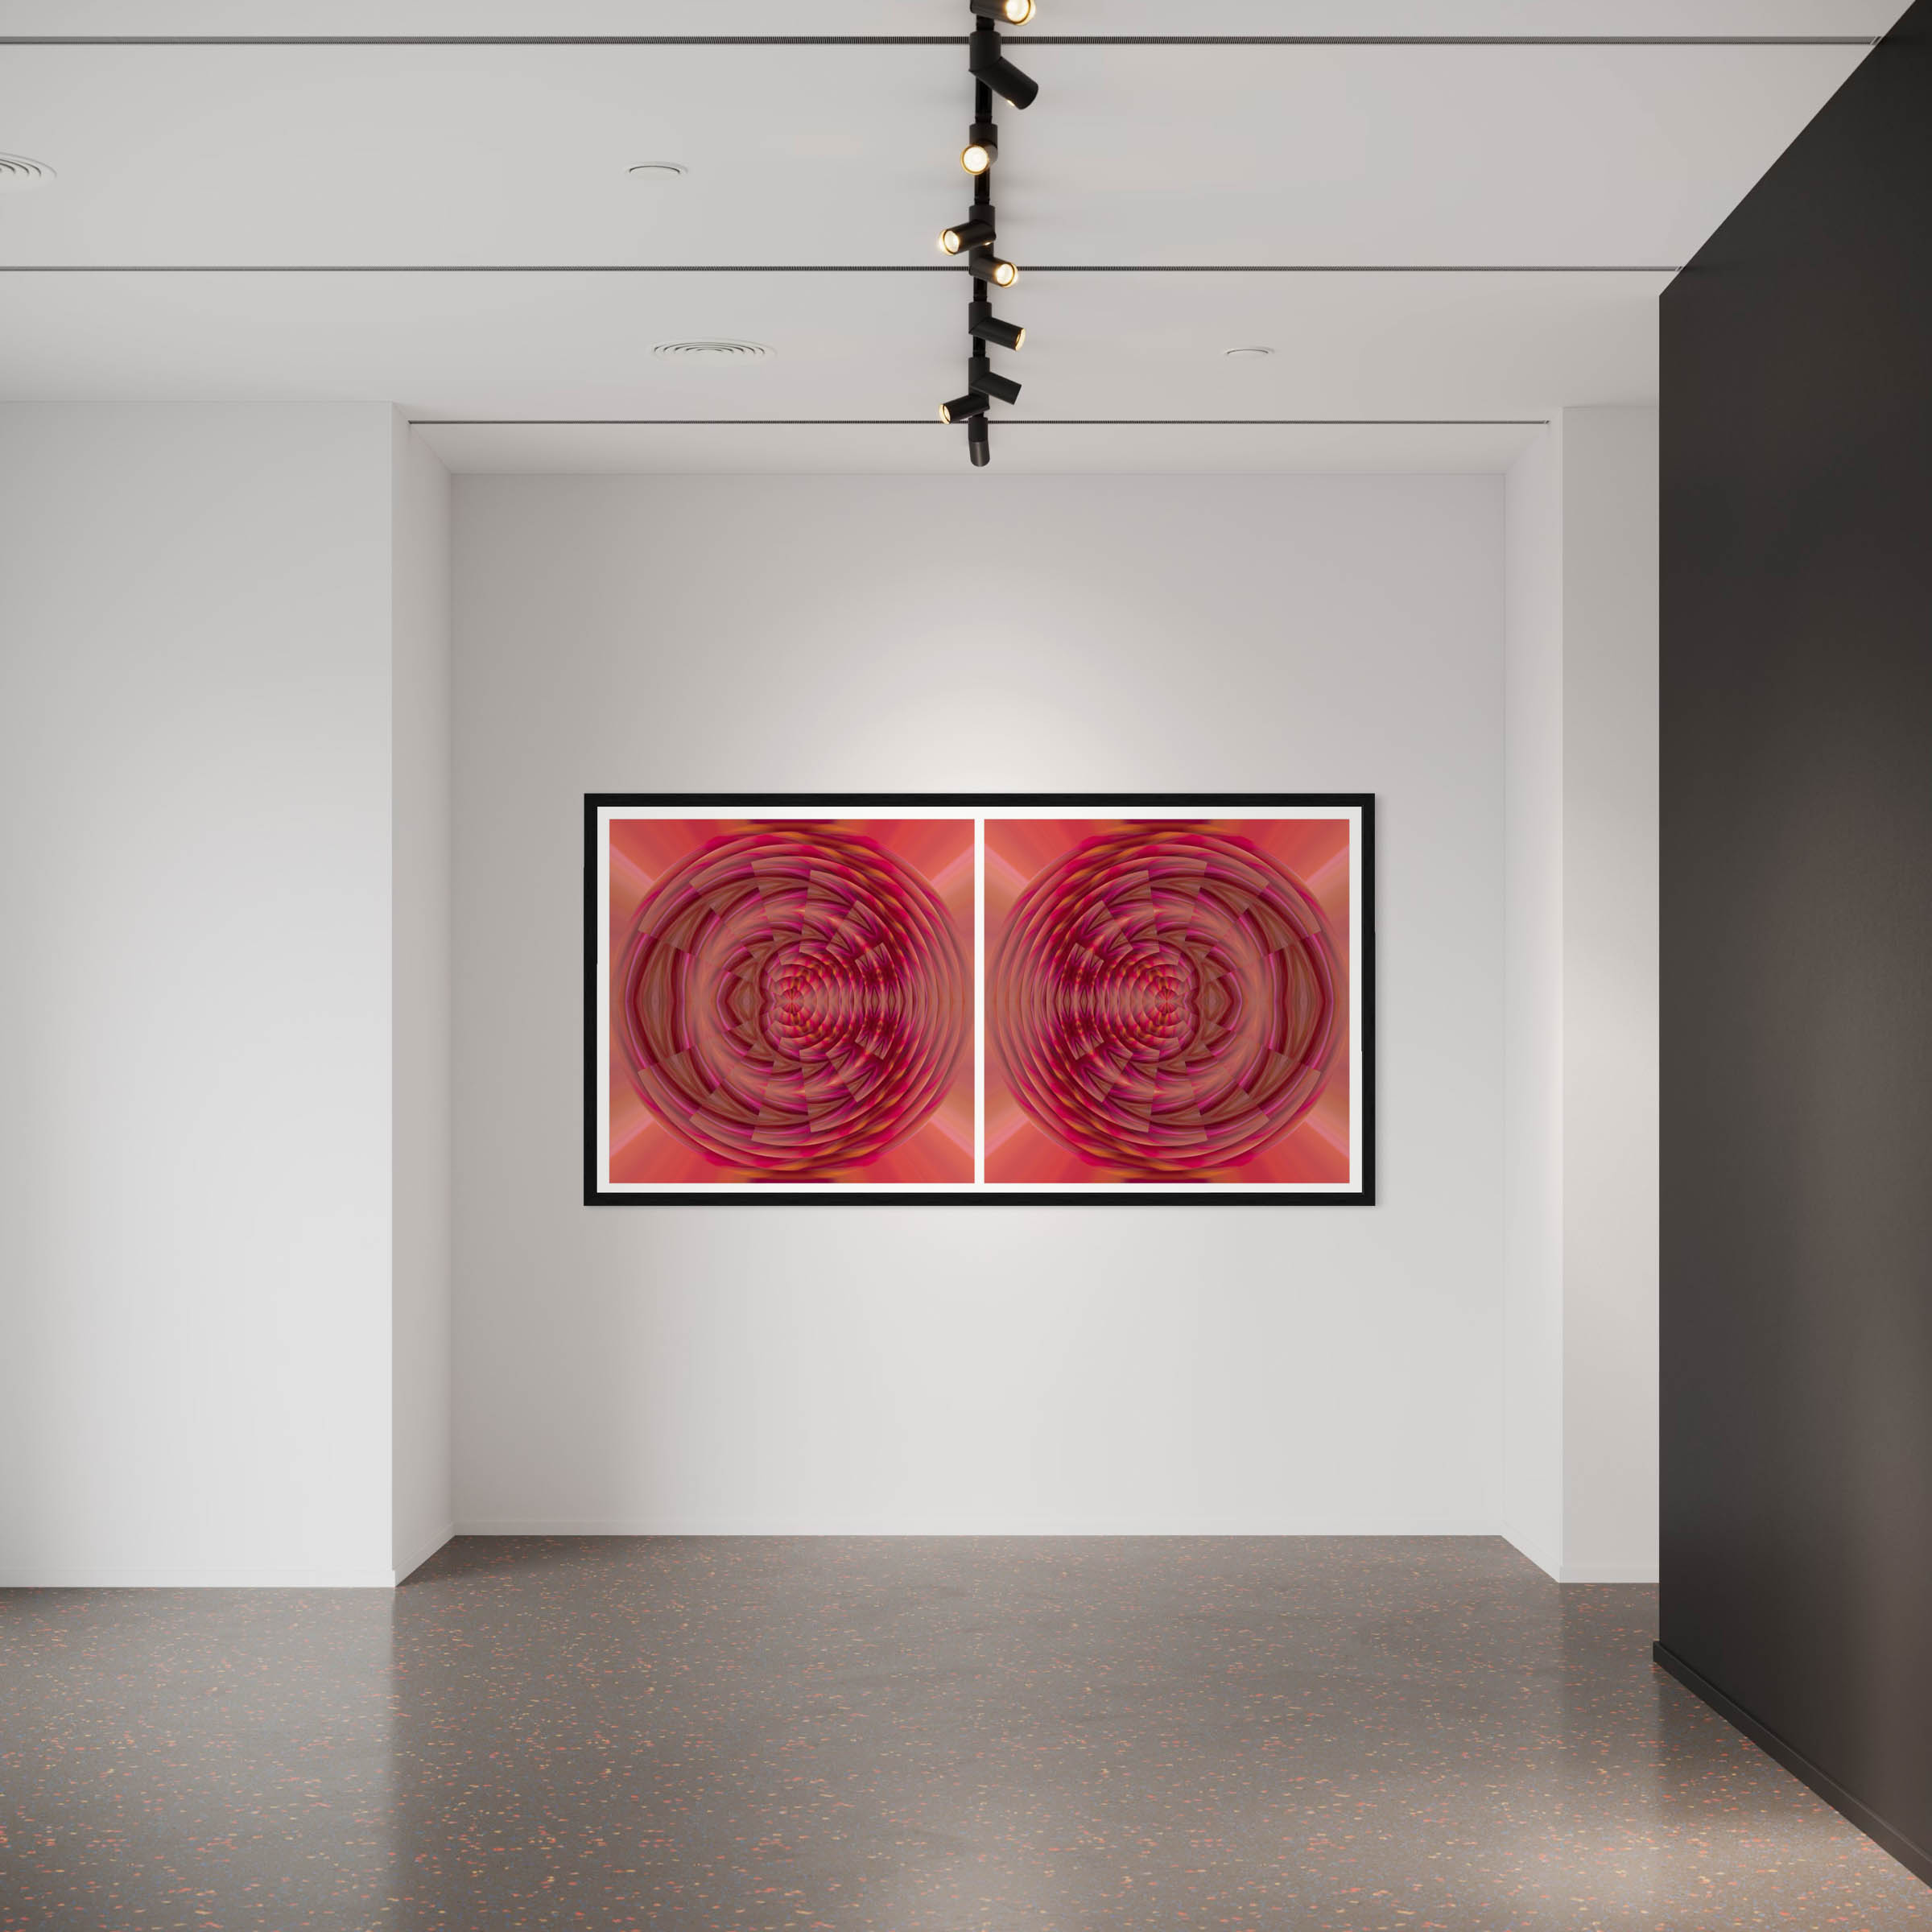 A large painting of a red circle in the middle of a room.